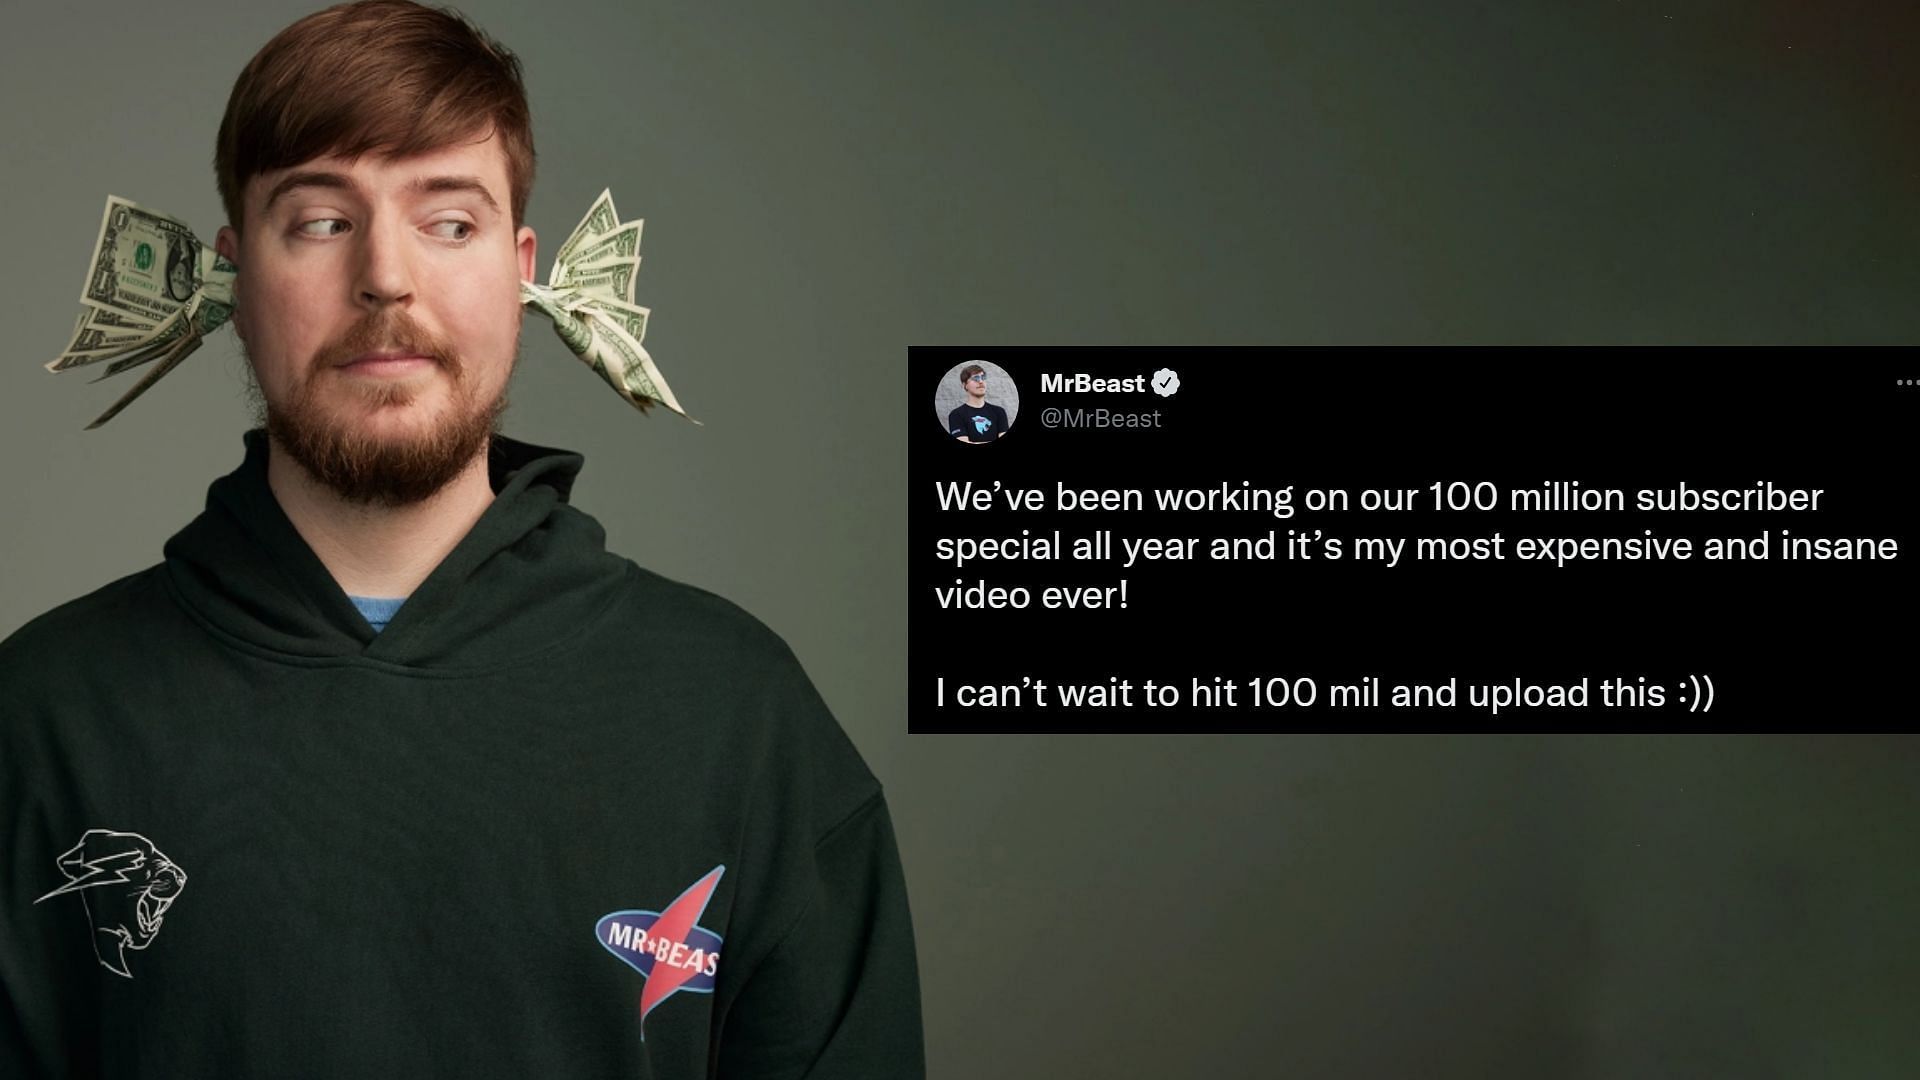 MrBeast reveals that next video will be his "most expensive and insane"